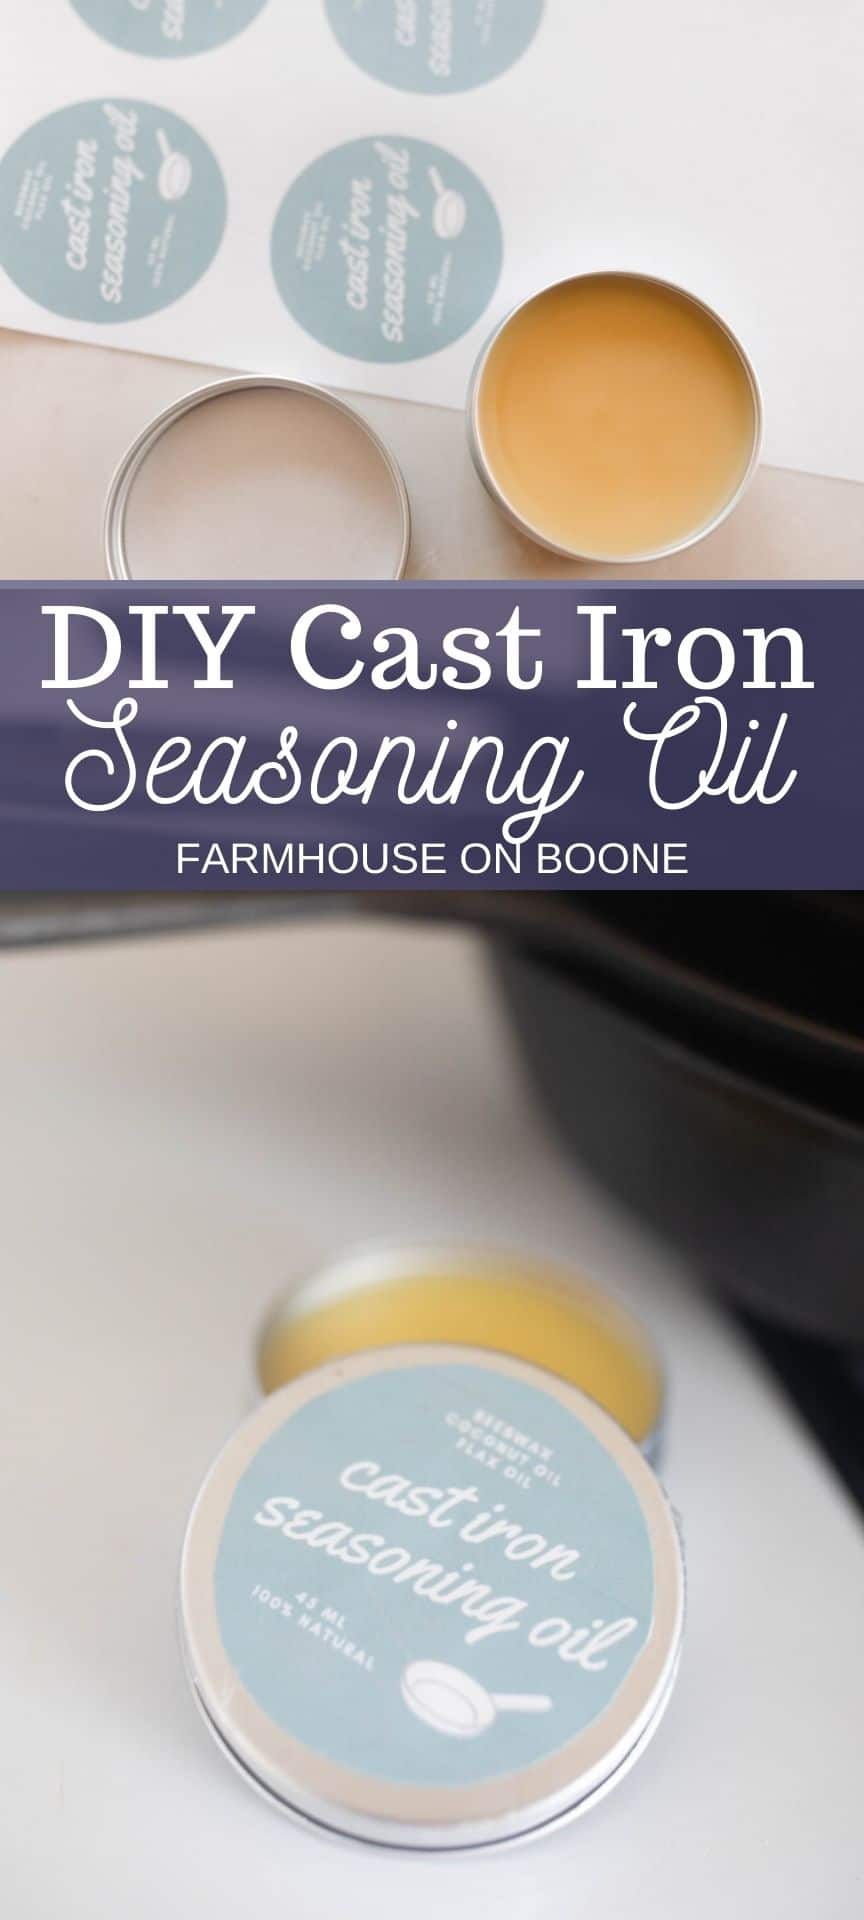 How To Season Cast Iron with Beeswax (BEST Method) – The Farmers Cupboard